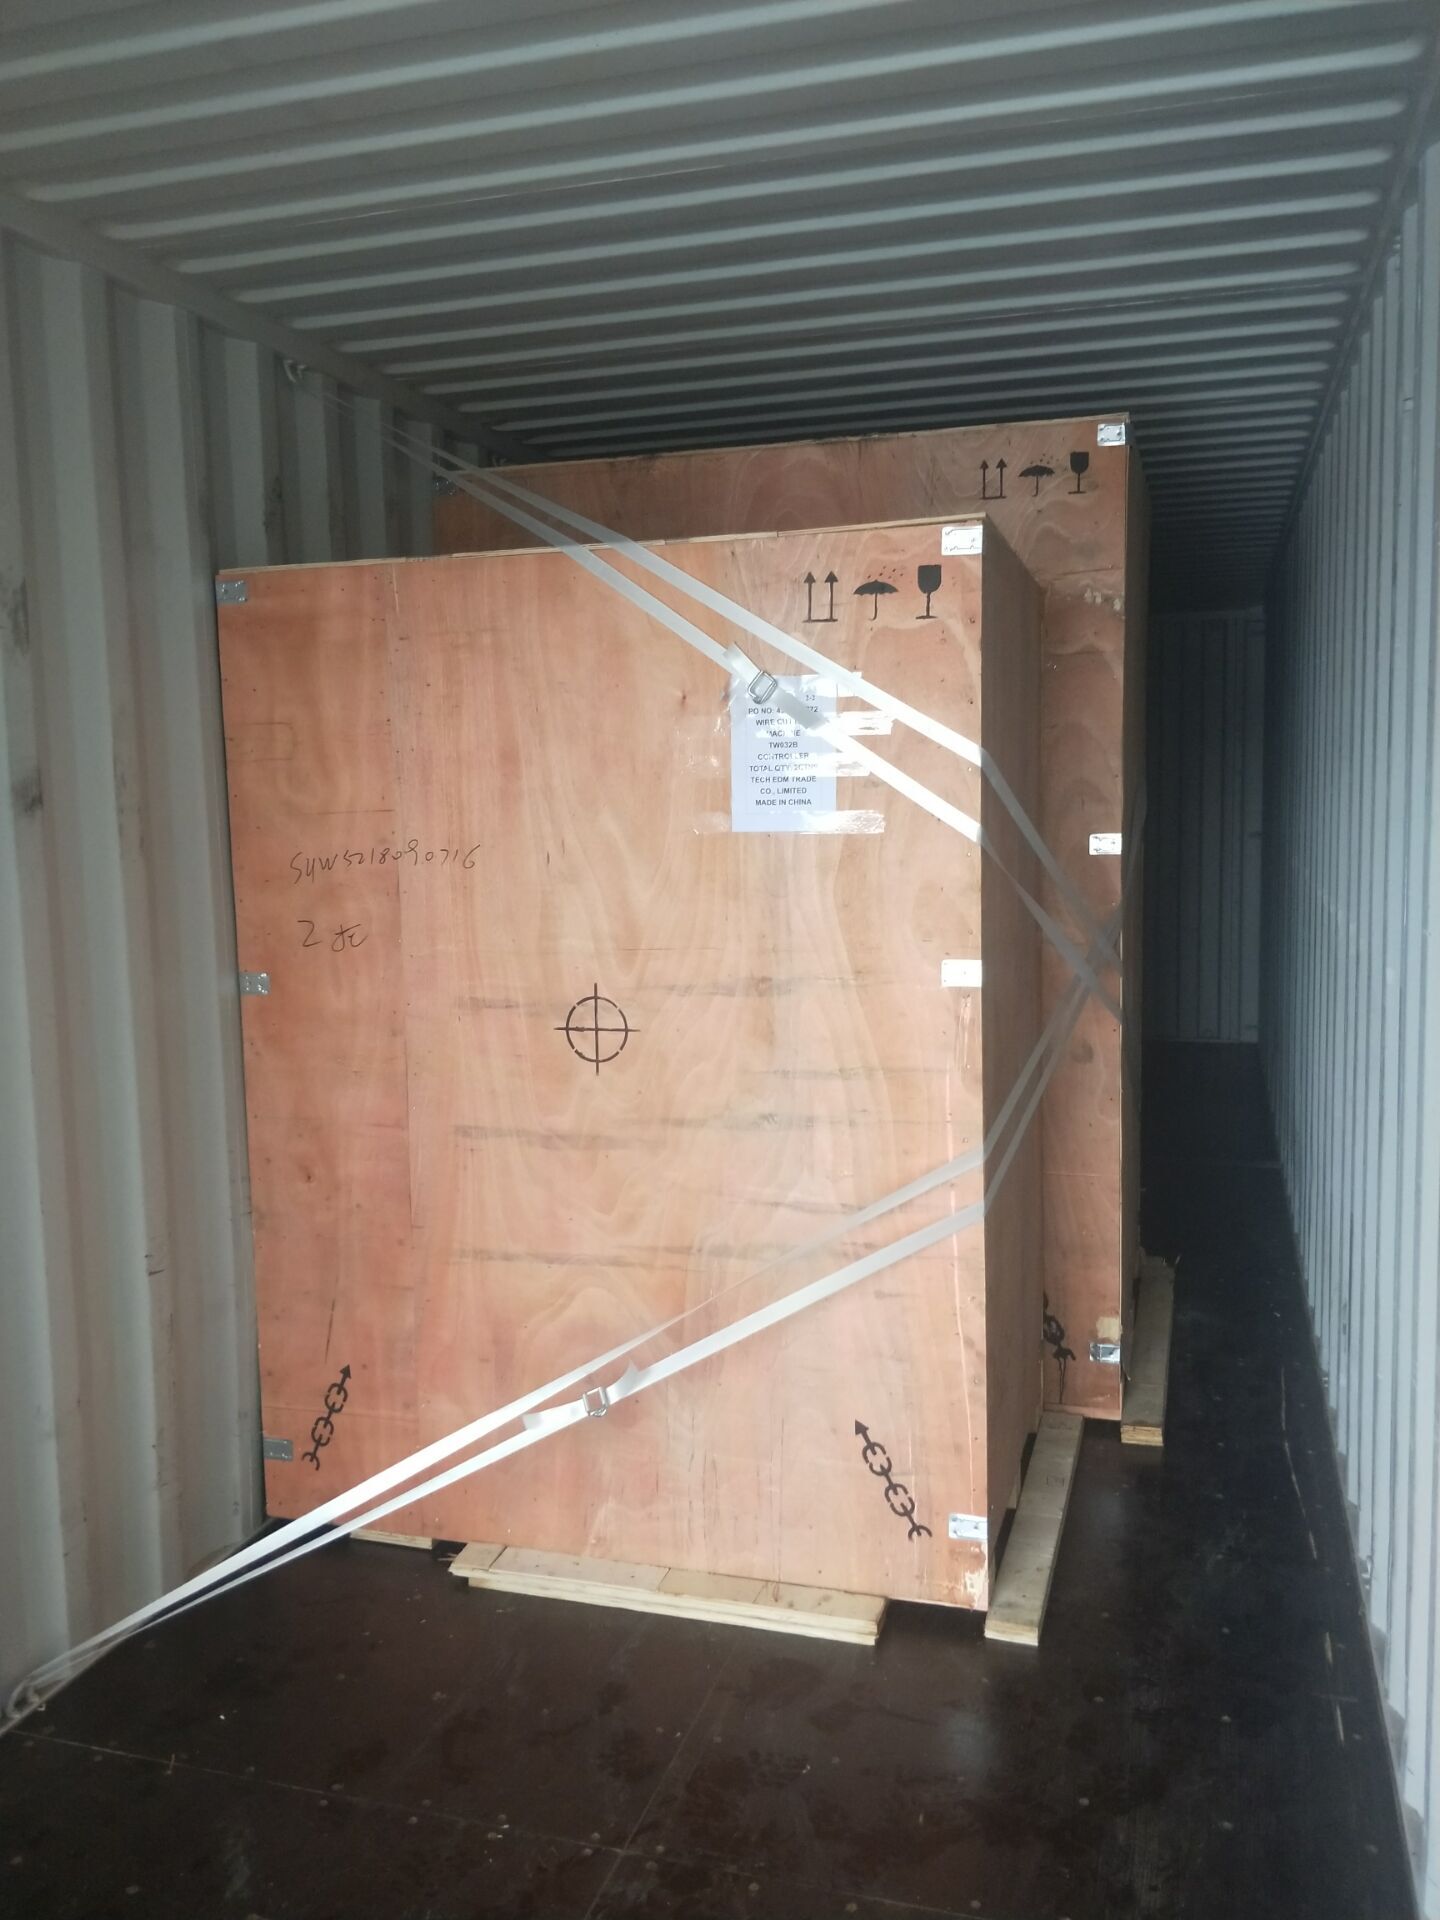 wire edm fastened in container